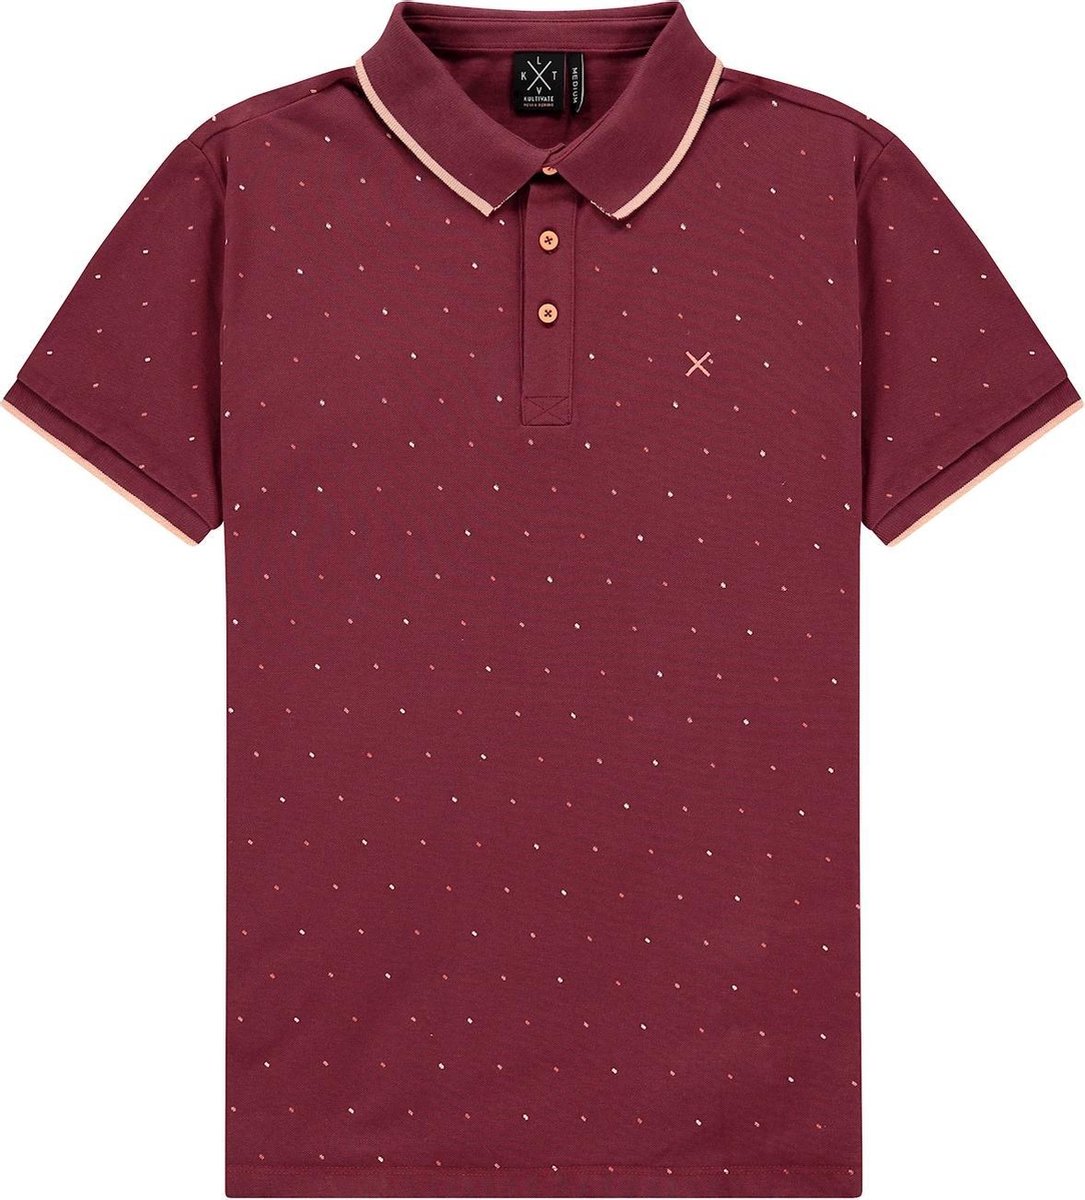 Kultivate Polo PL Hexagon Rood - Maat L